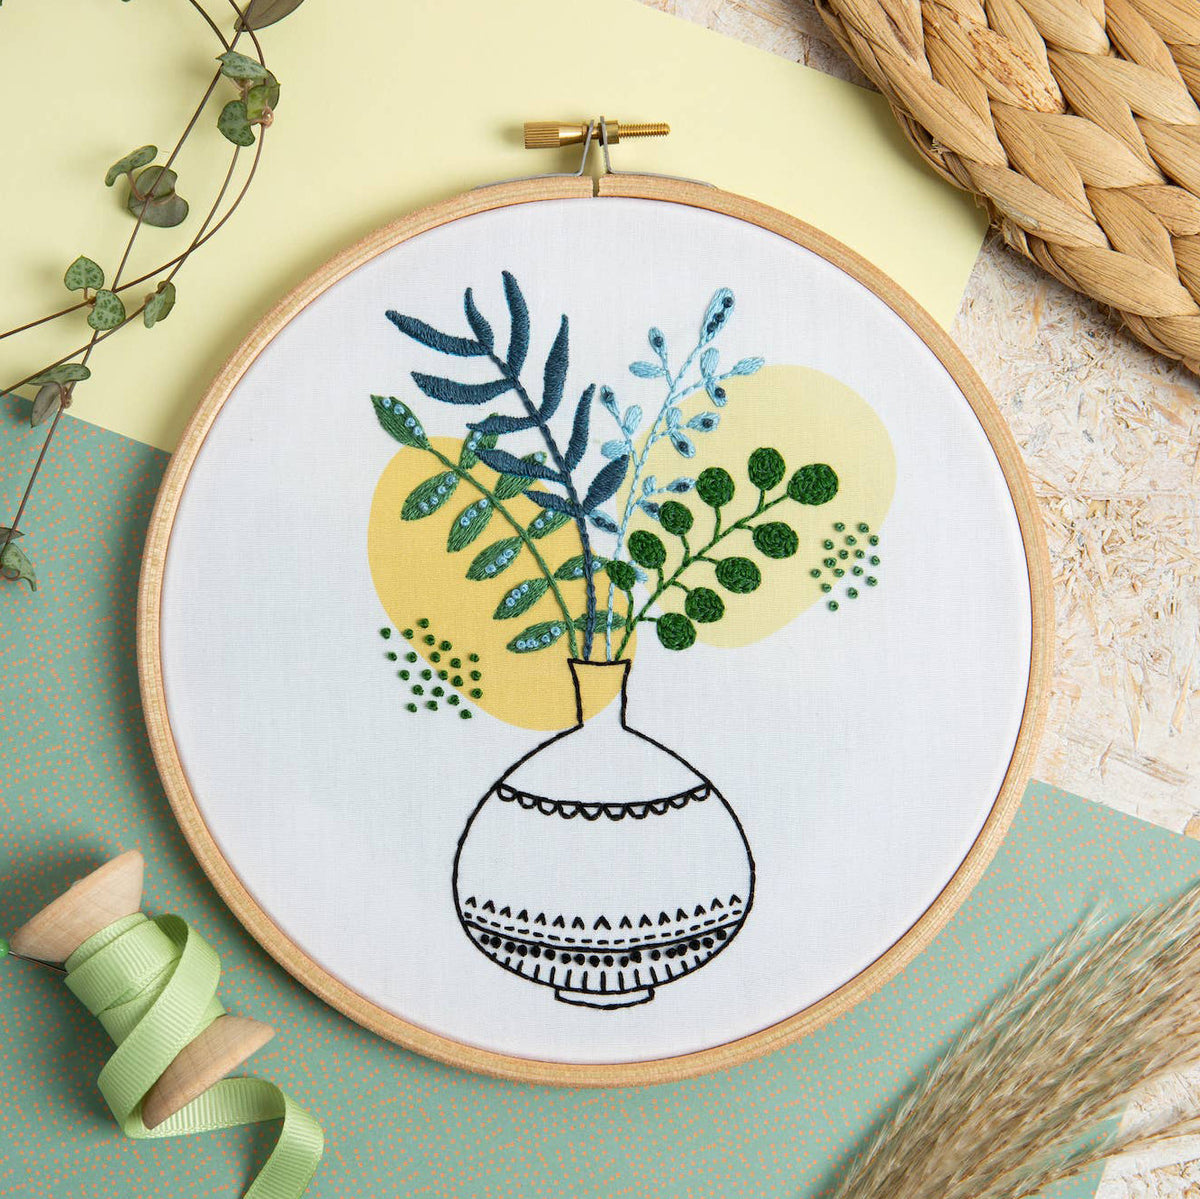 Green Fingers Hand Embroidery Kit